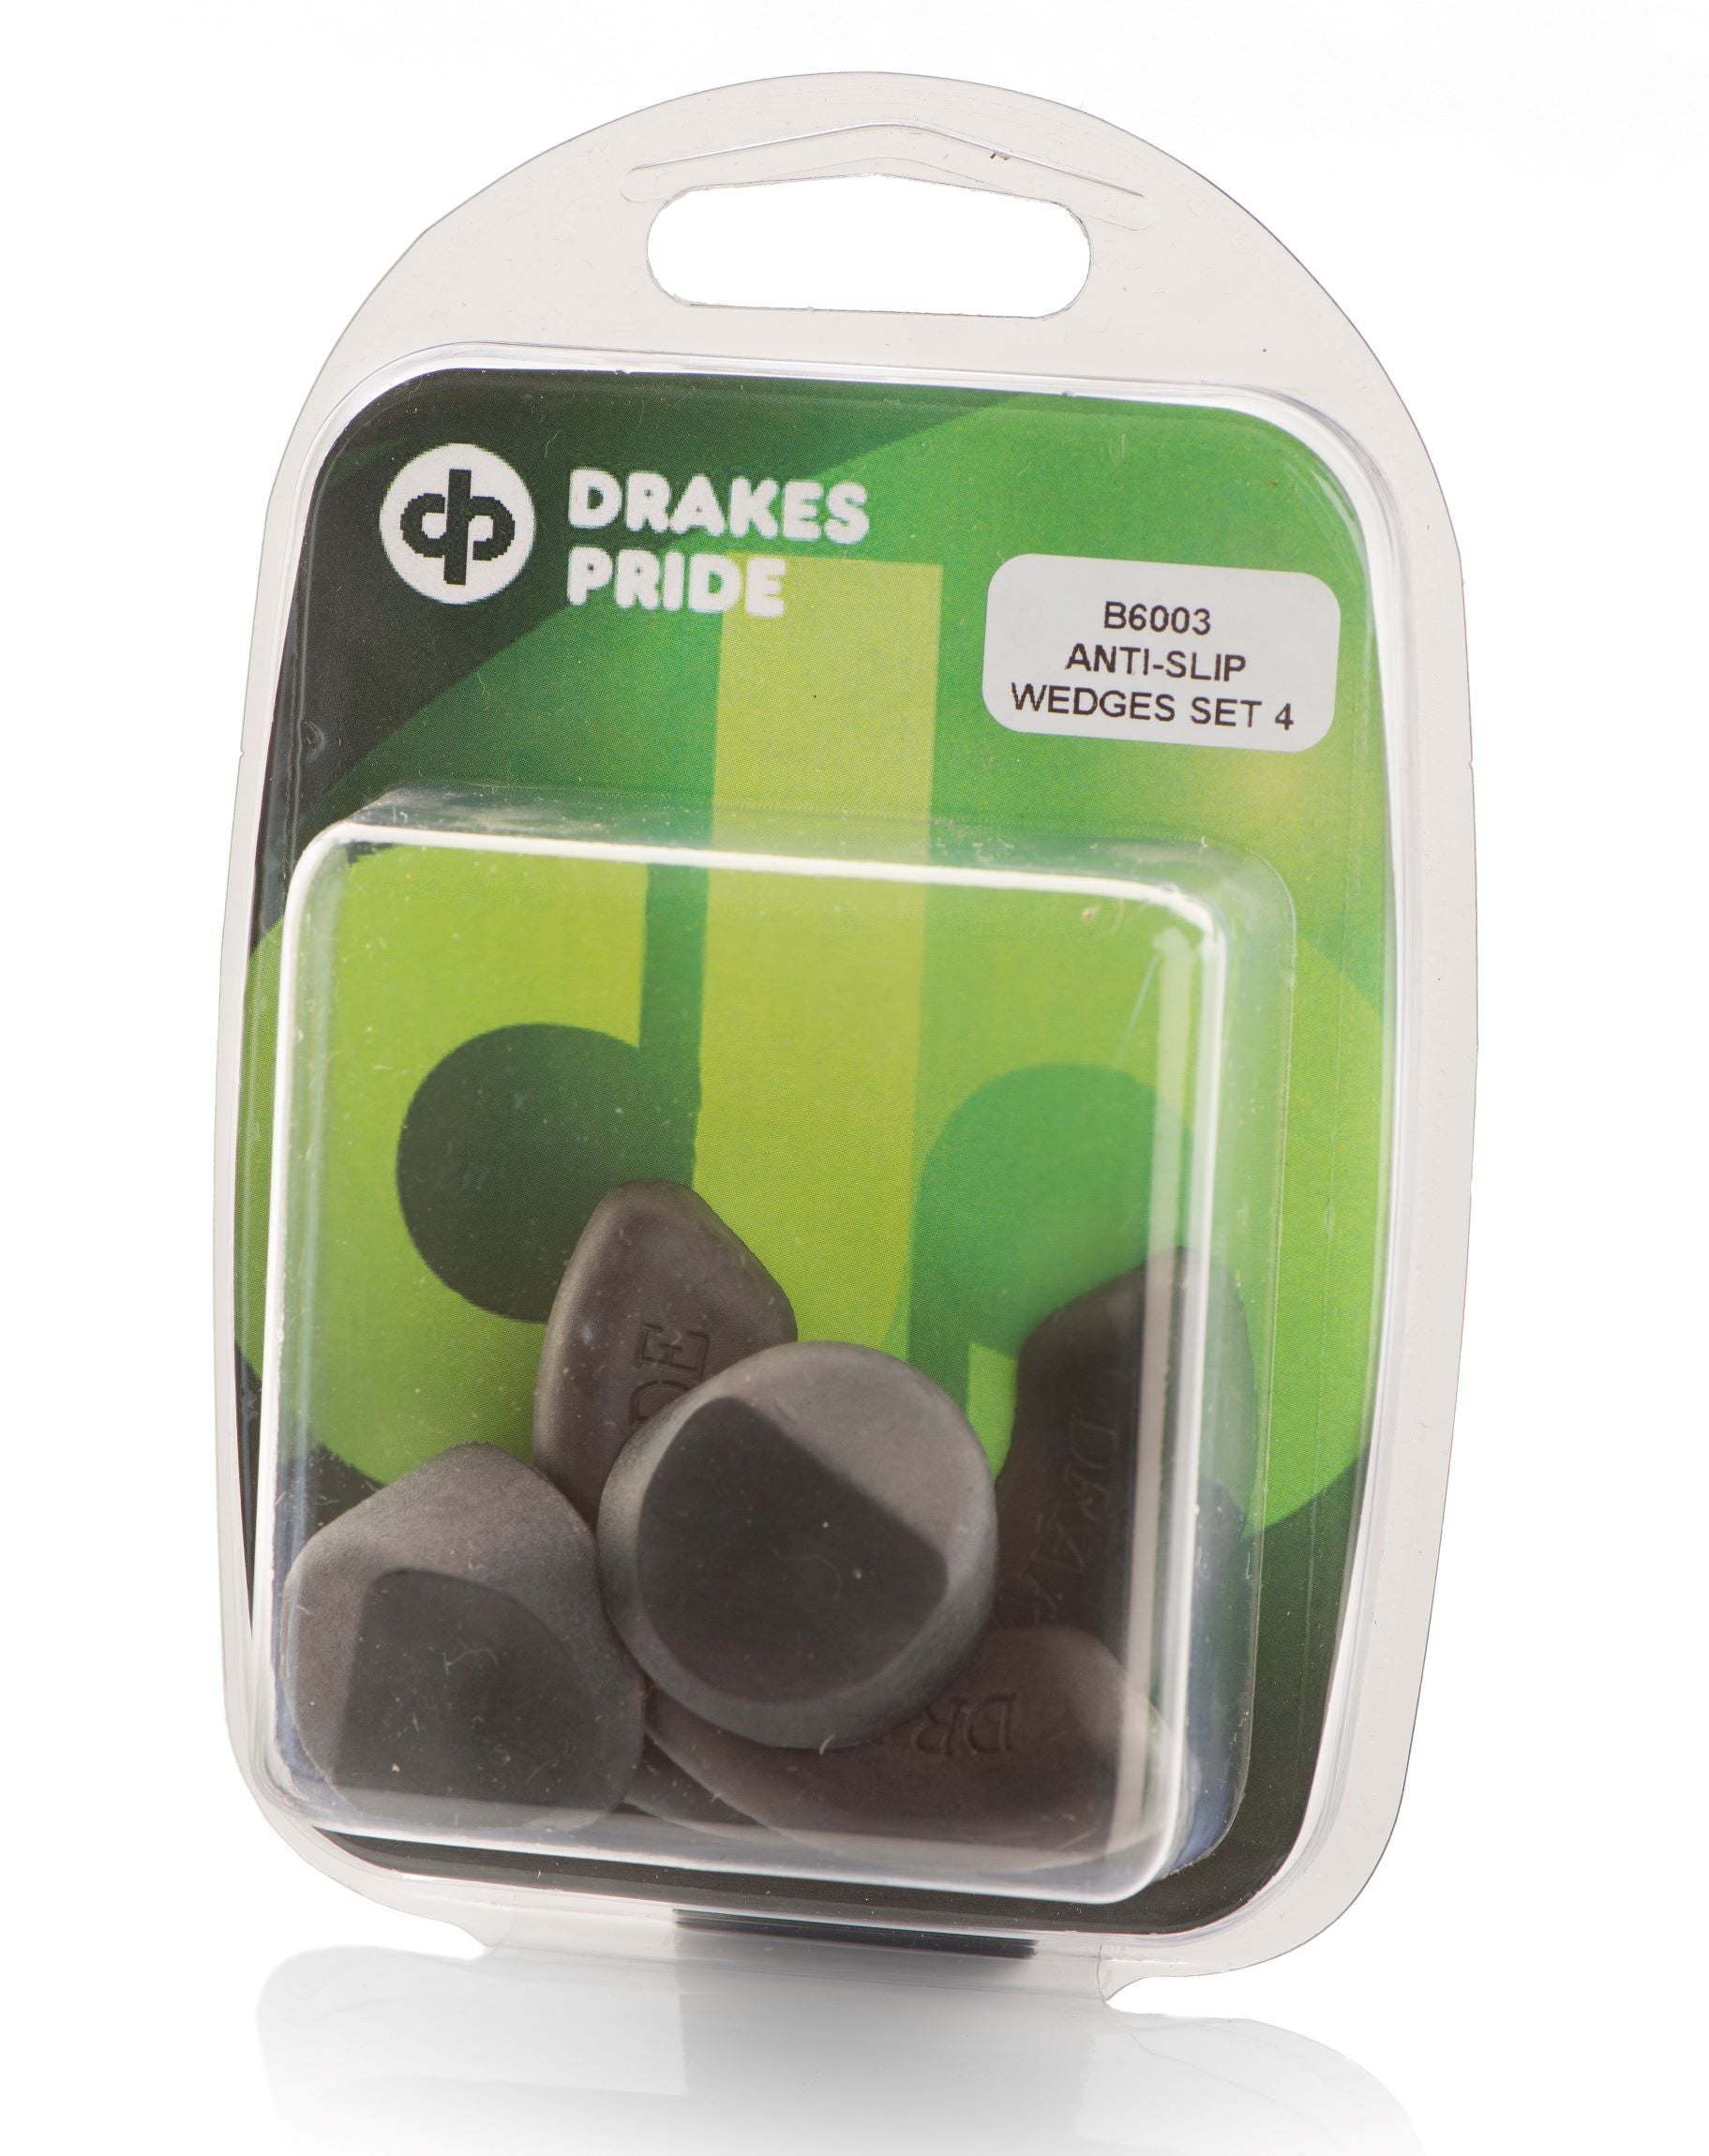 Drakes Pride Rubber Multi-Angle Wedges Item No B6003